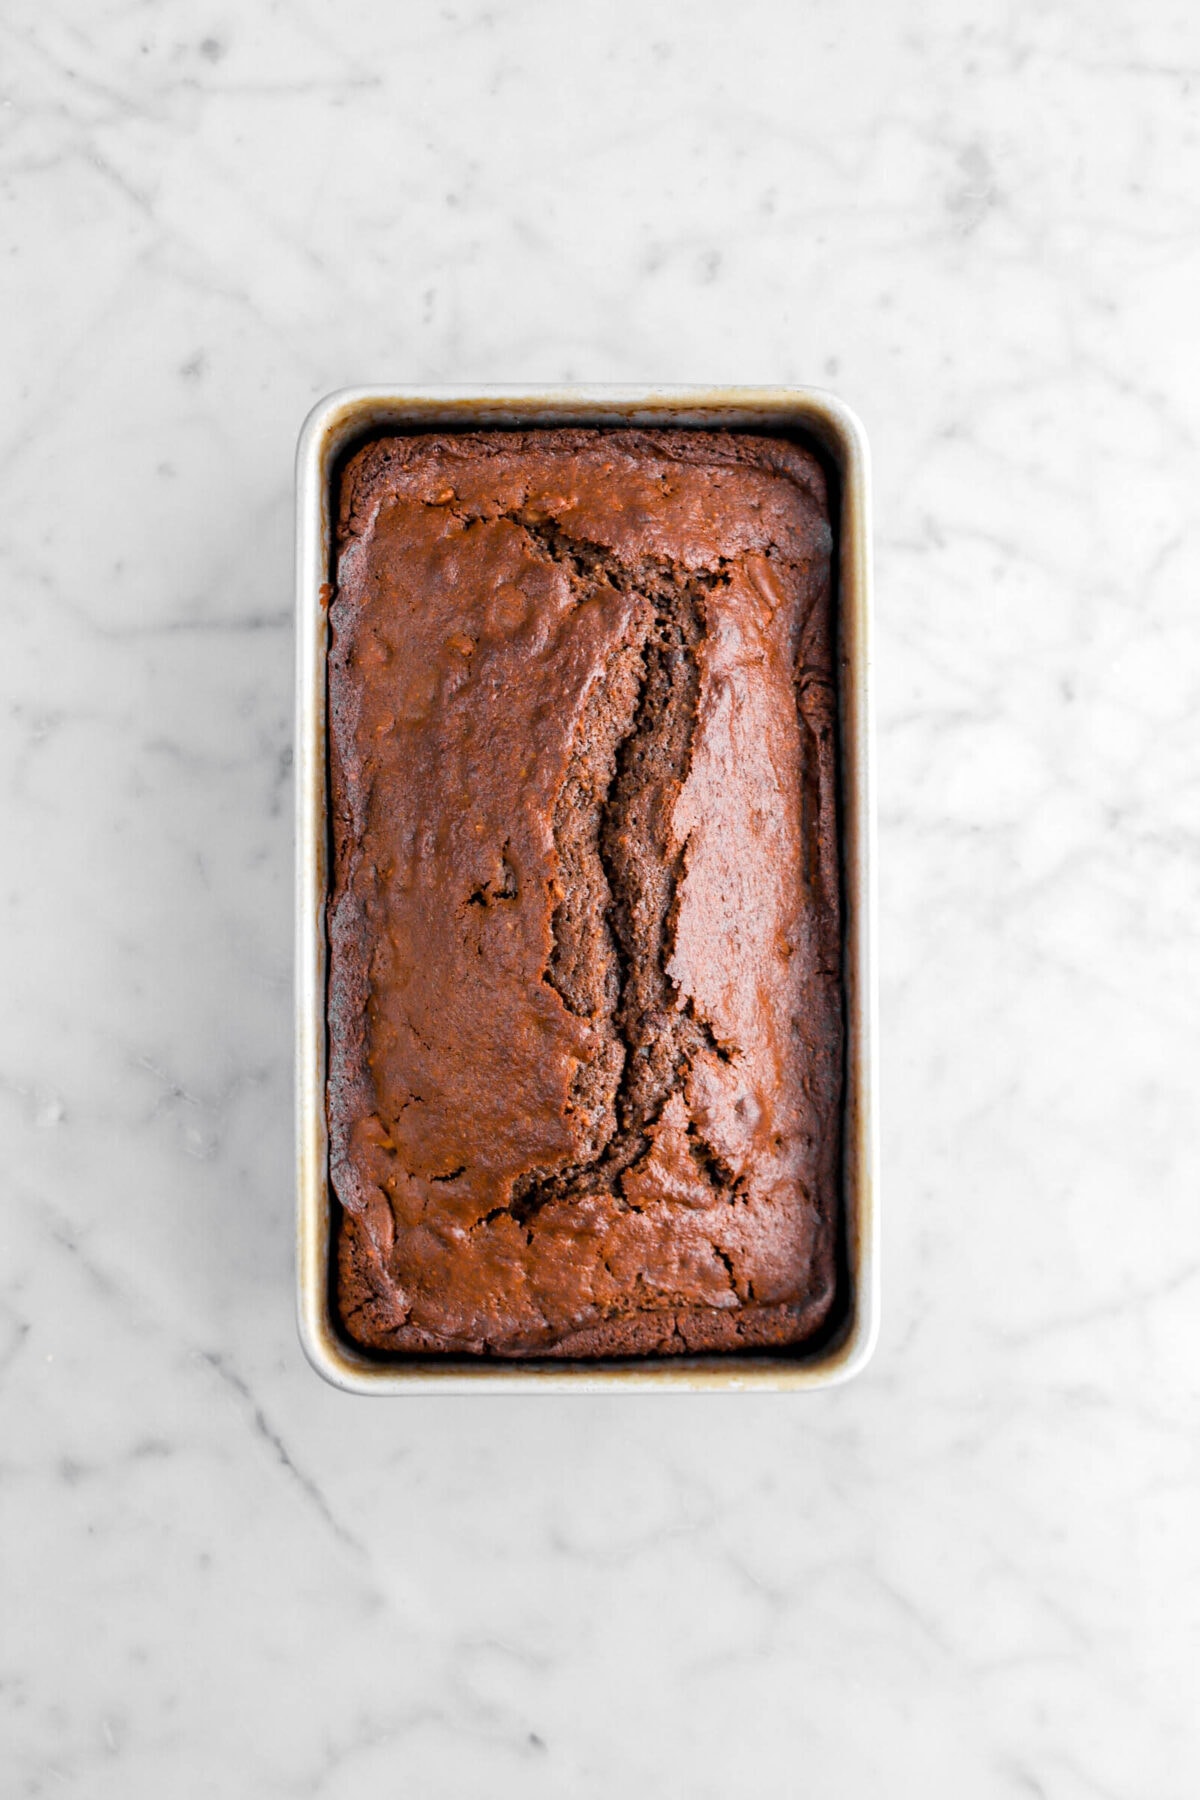 baked chocolate loaf in pan on marble surface